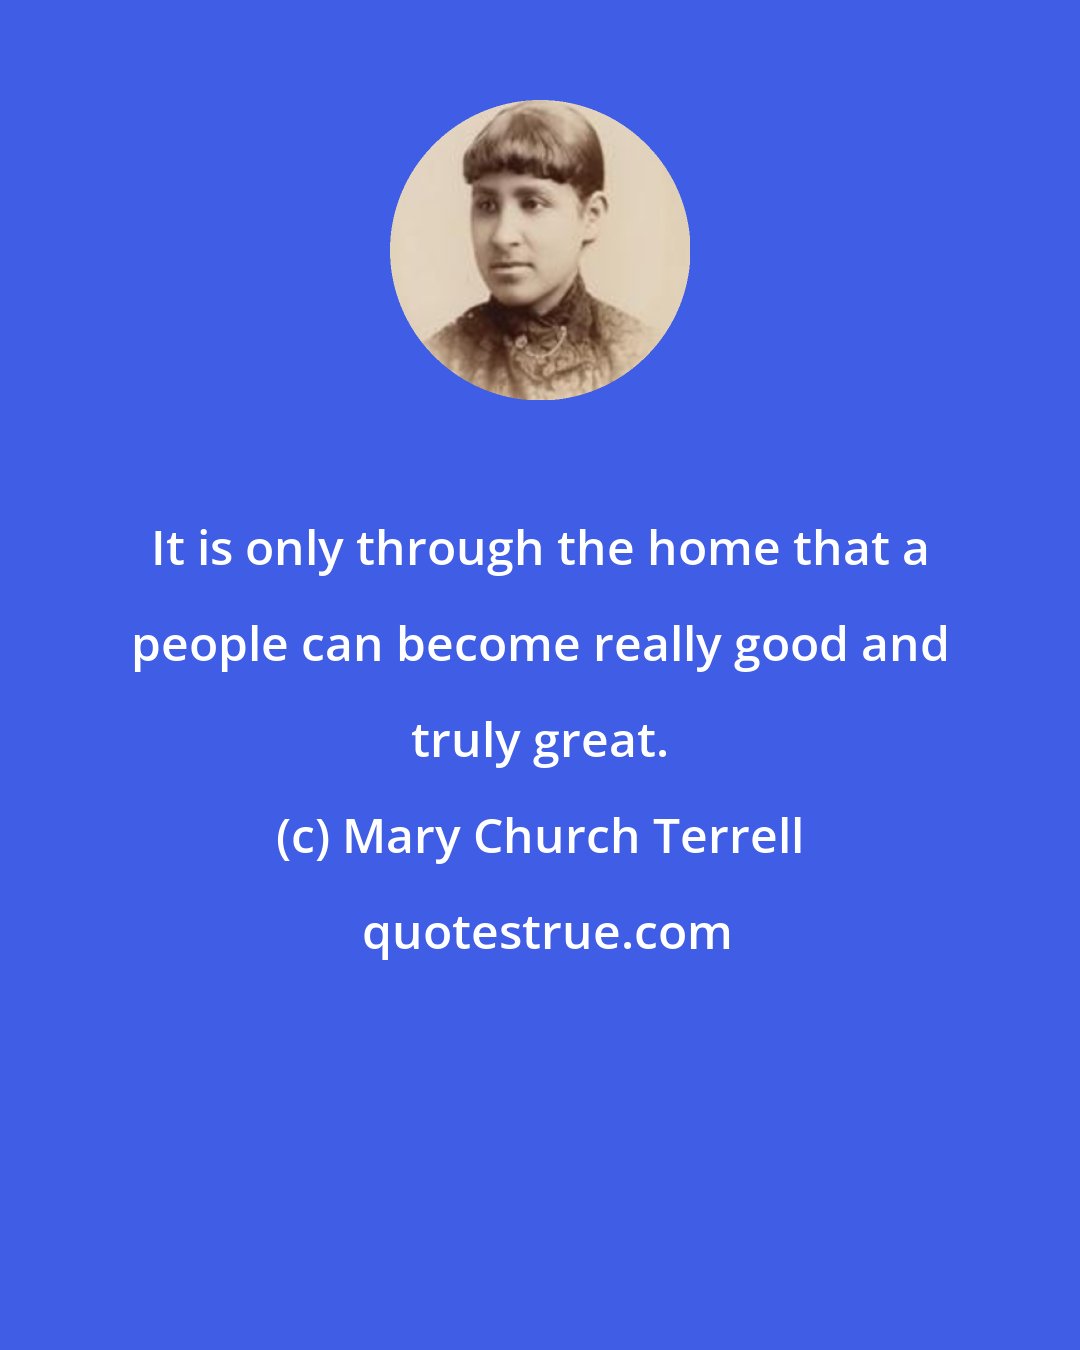 Mary Church Terrell: It is only through the home that a people can become really good and truly great.